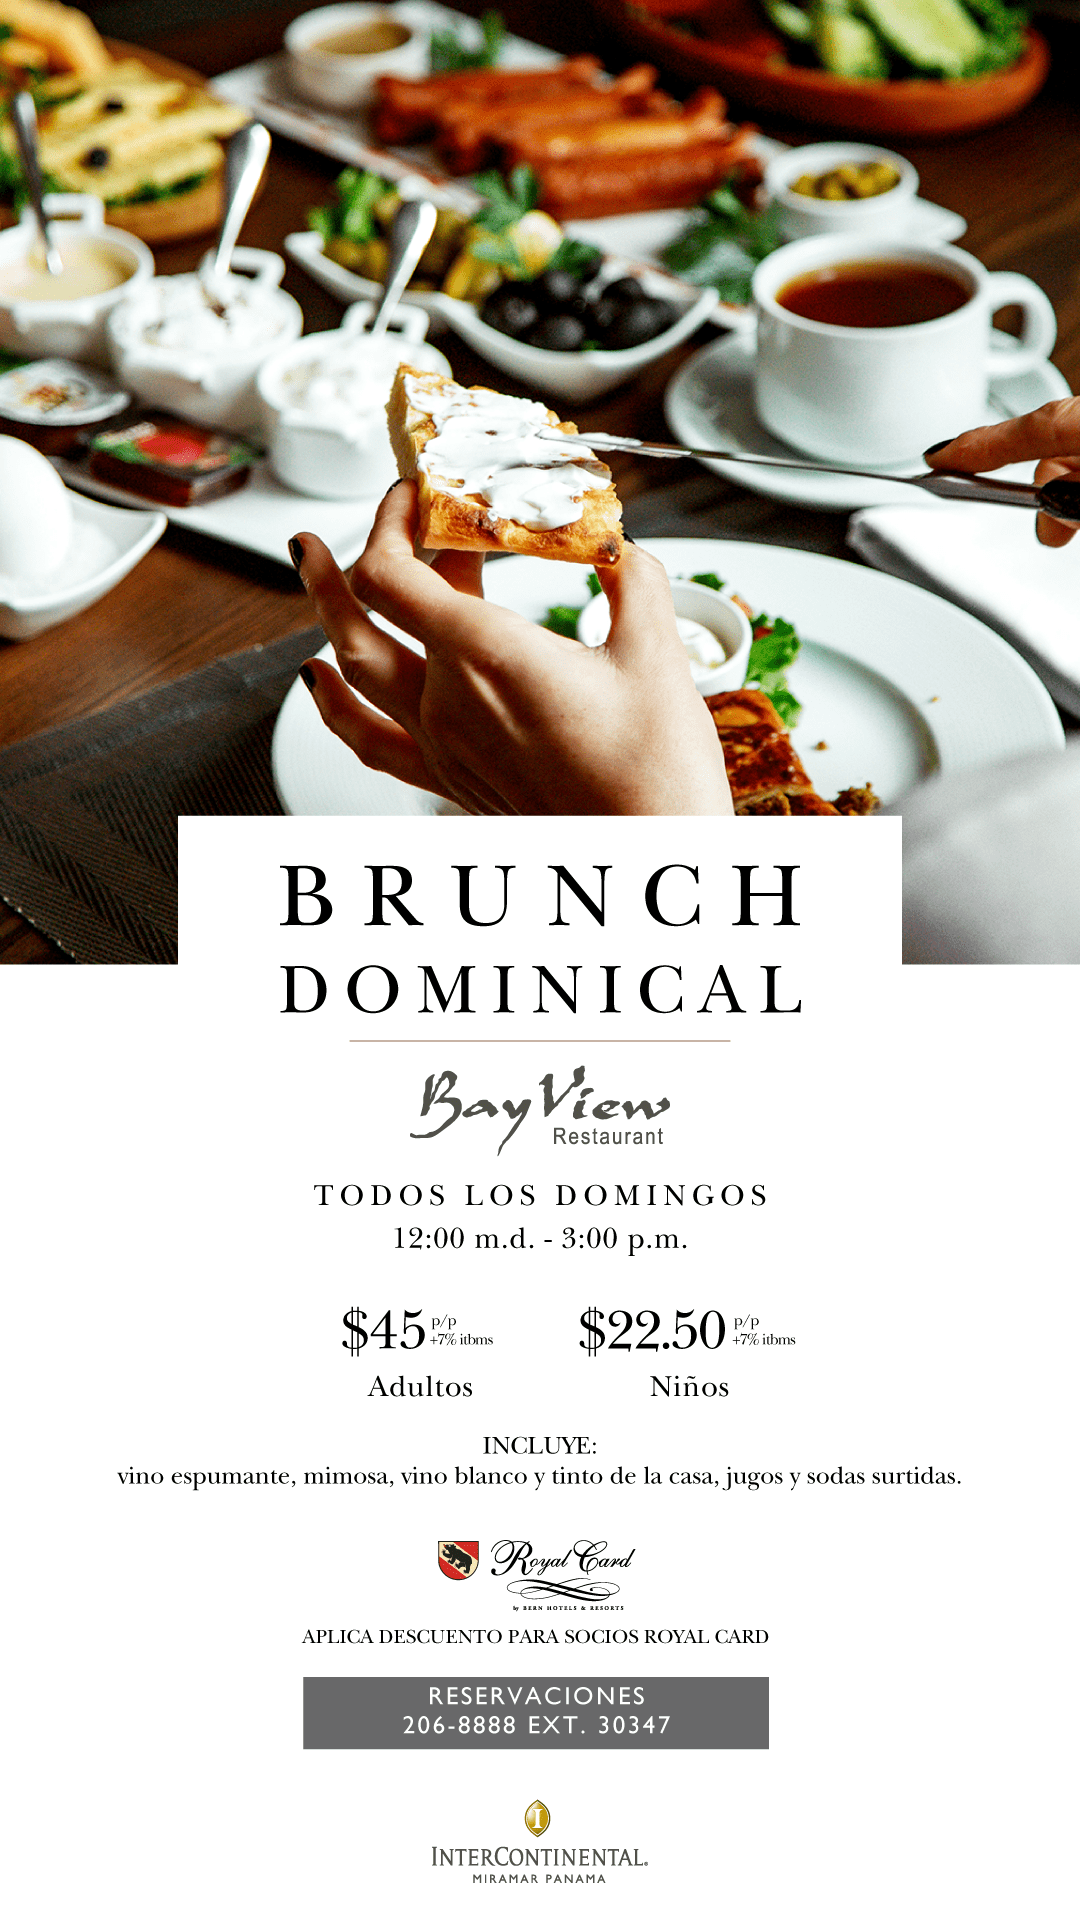 Brunch-Dominical---Story-min